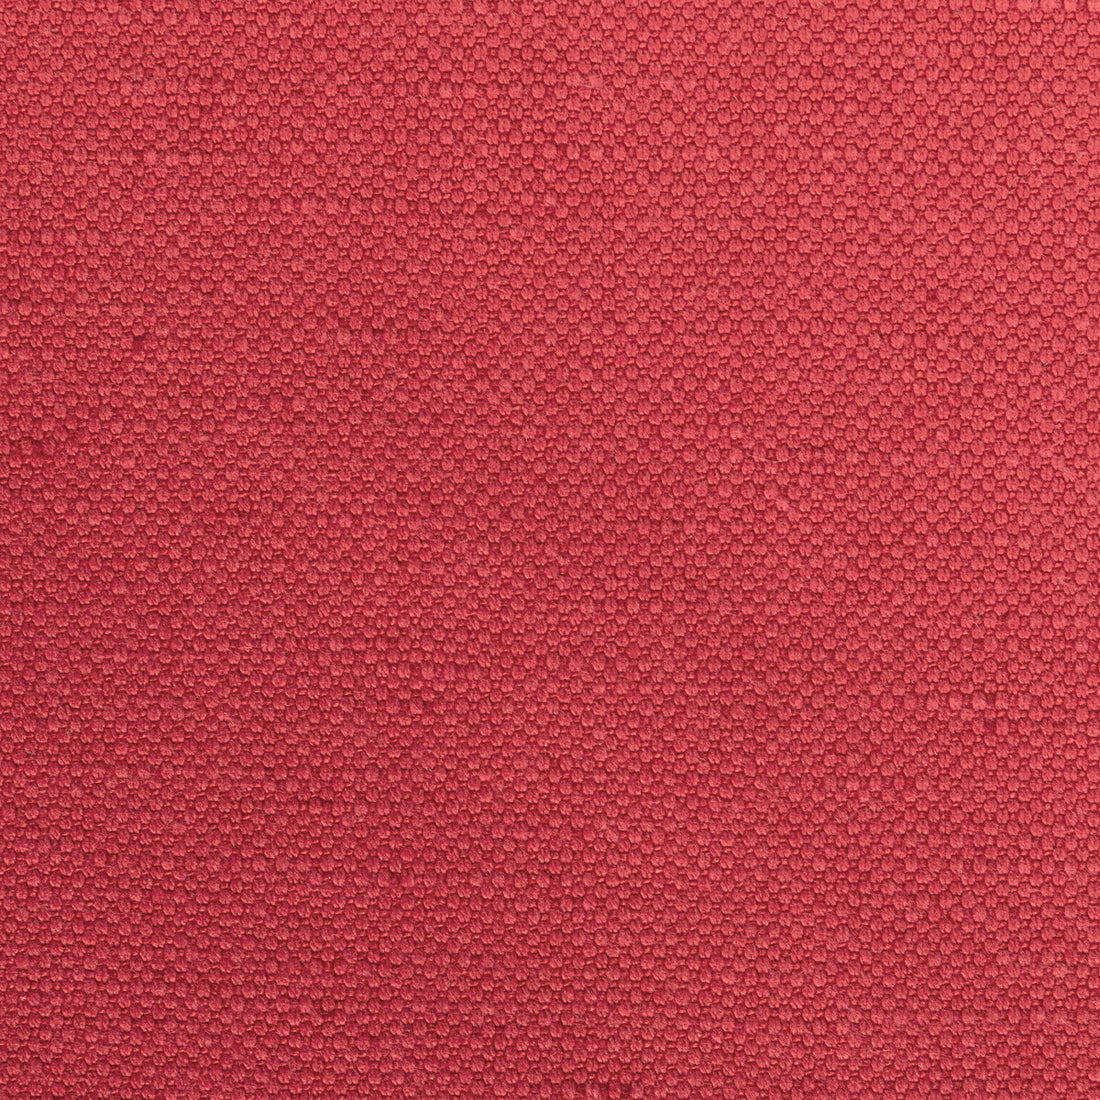 Carson fabric in roses color - pattern 36282.19.0 - by Kravet Basics